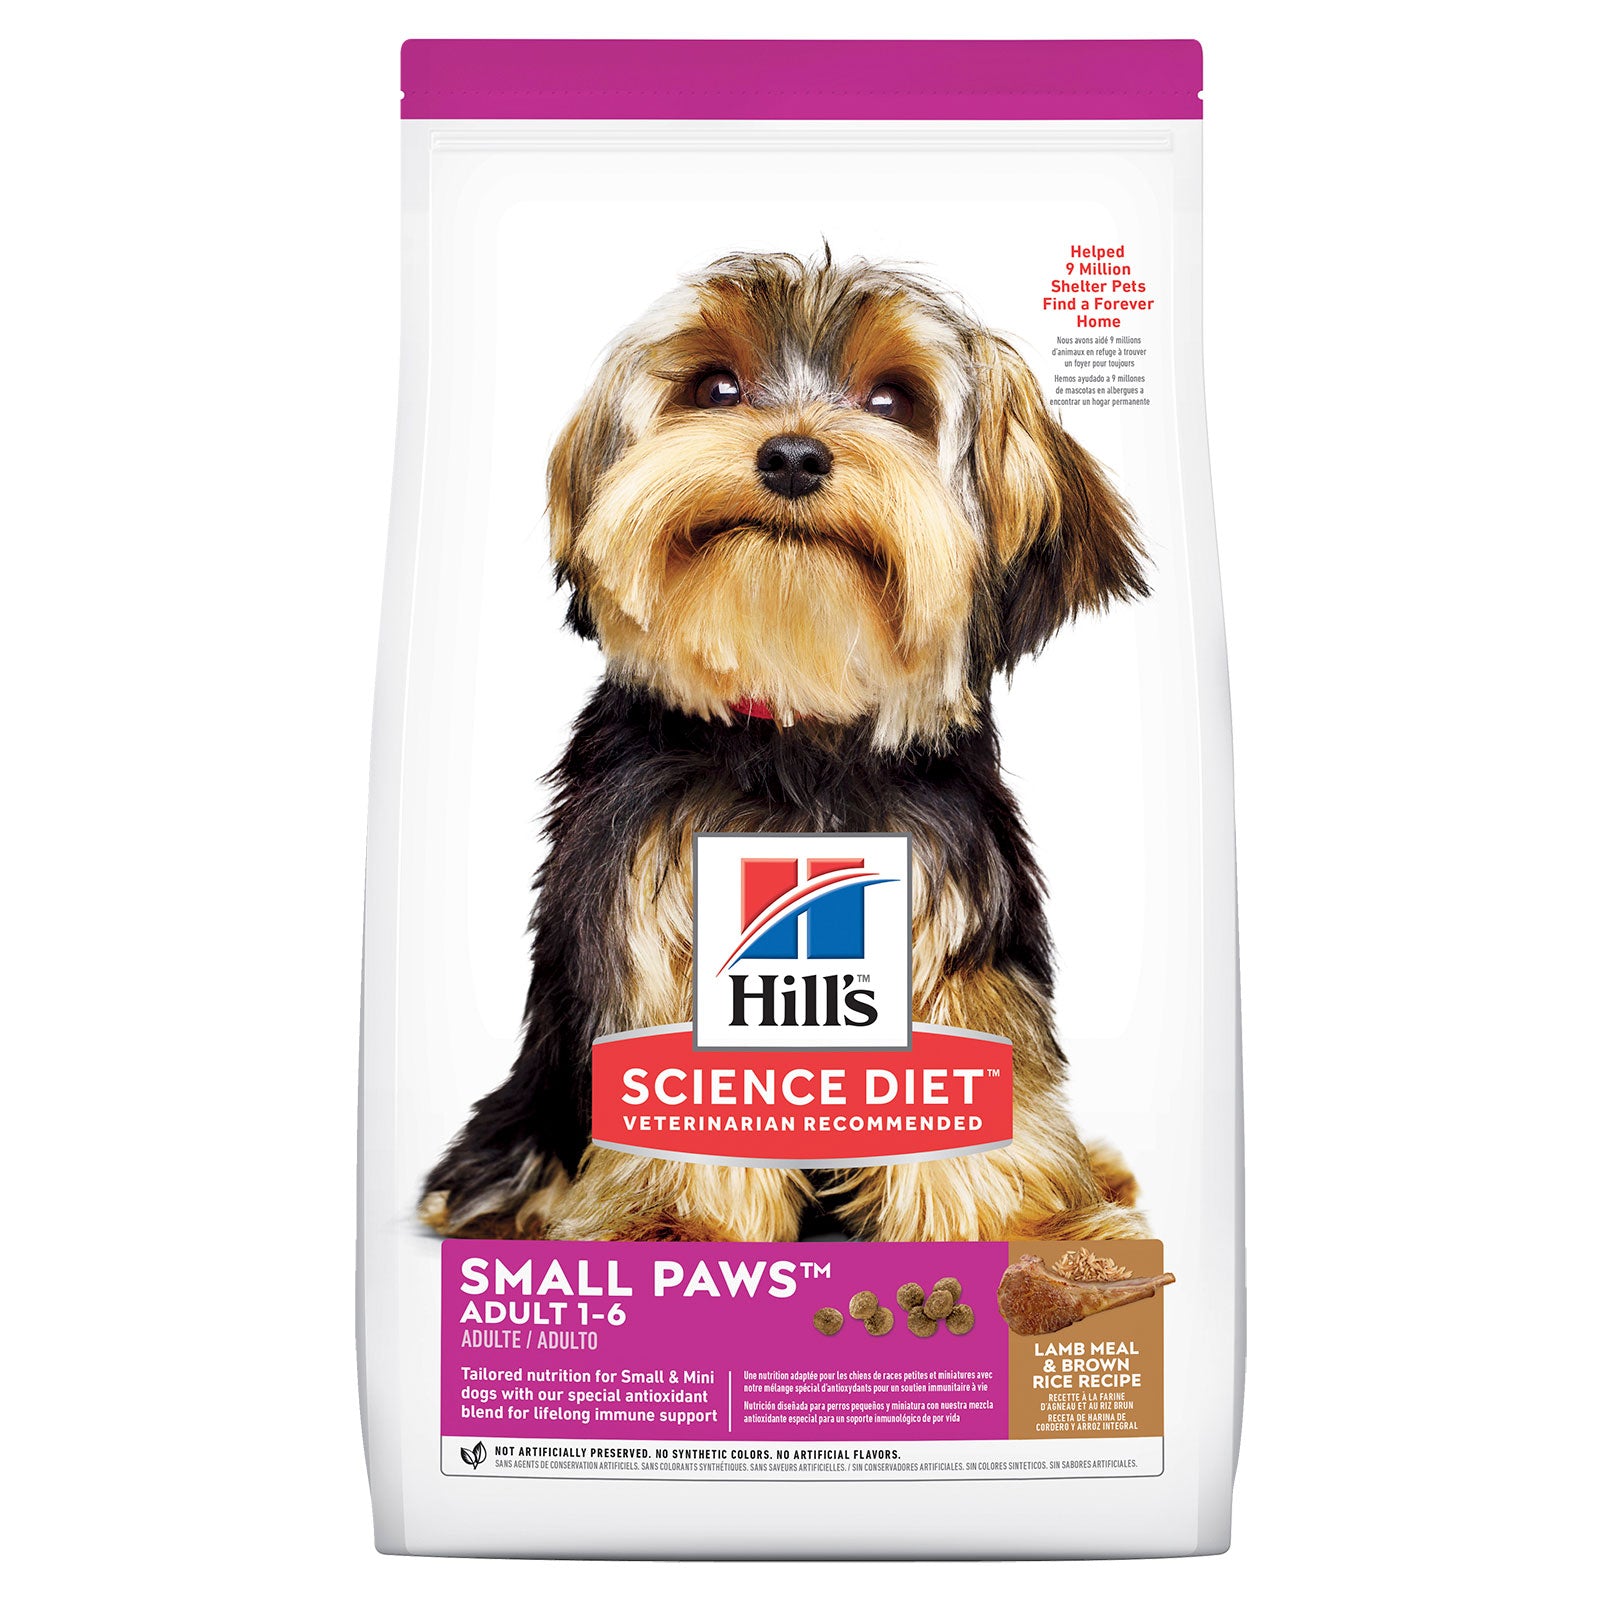 Hill's Science Diet Dog Food Adult Small Paws Lamb Meal & Brown Rice